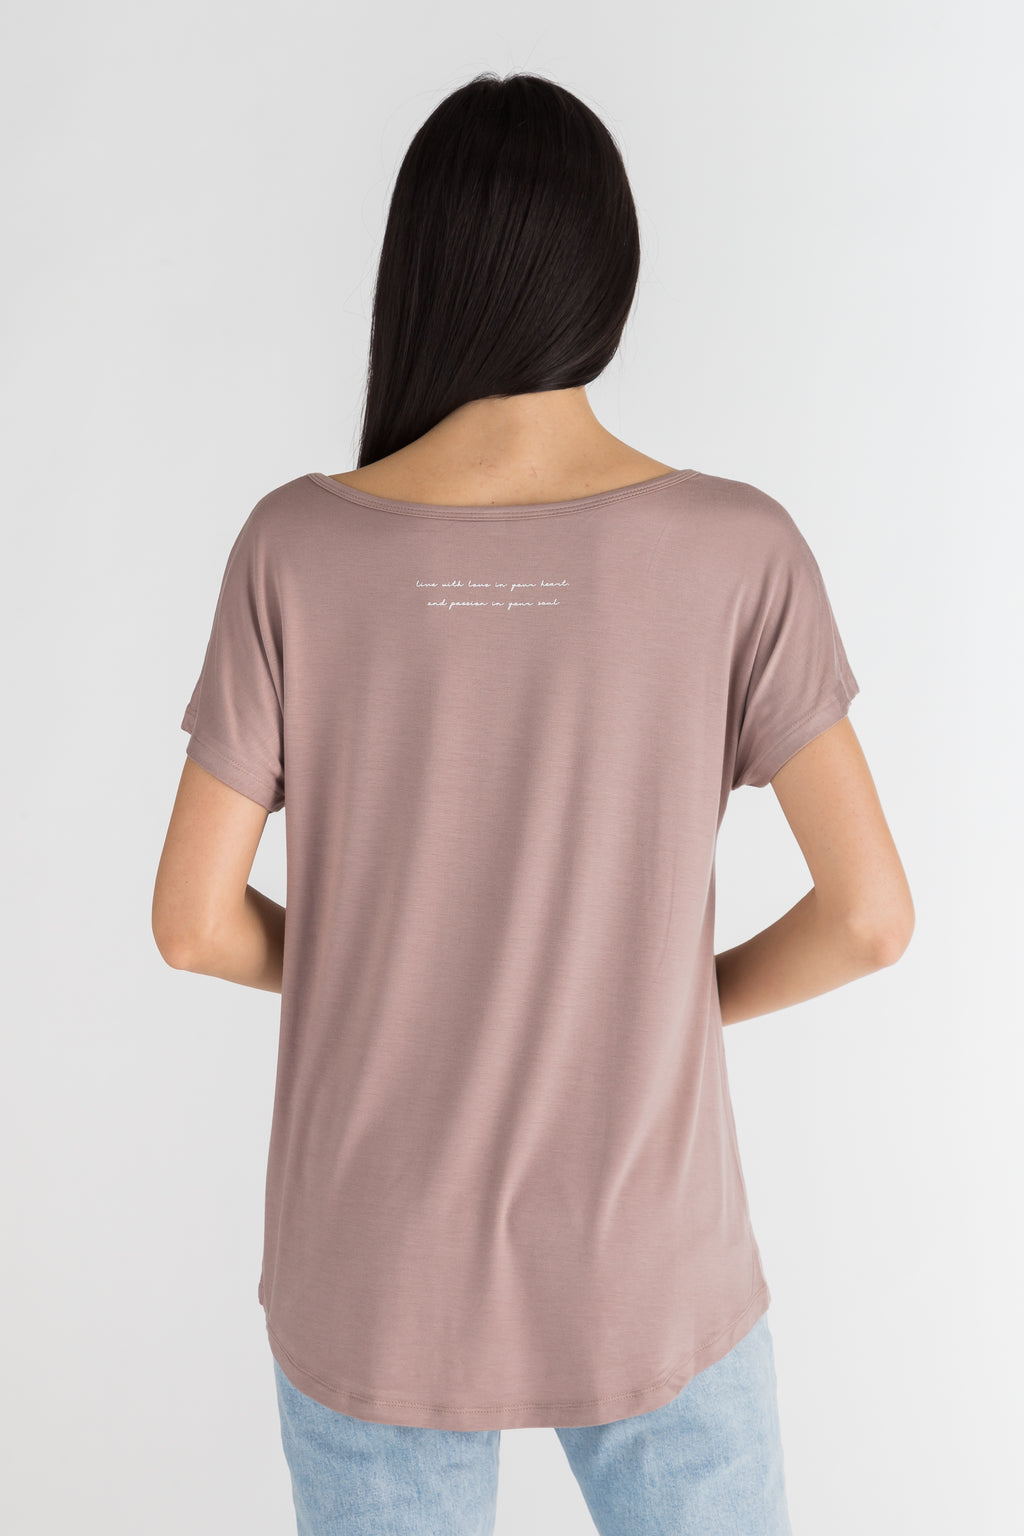 Live with Love in Your Heart and Passion in Your Soul- Himalayan Salt Tee